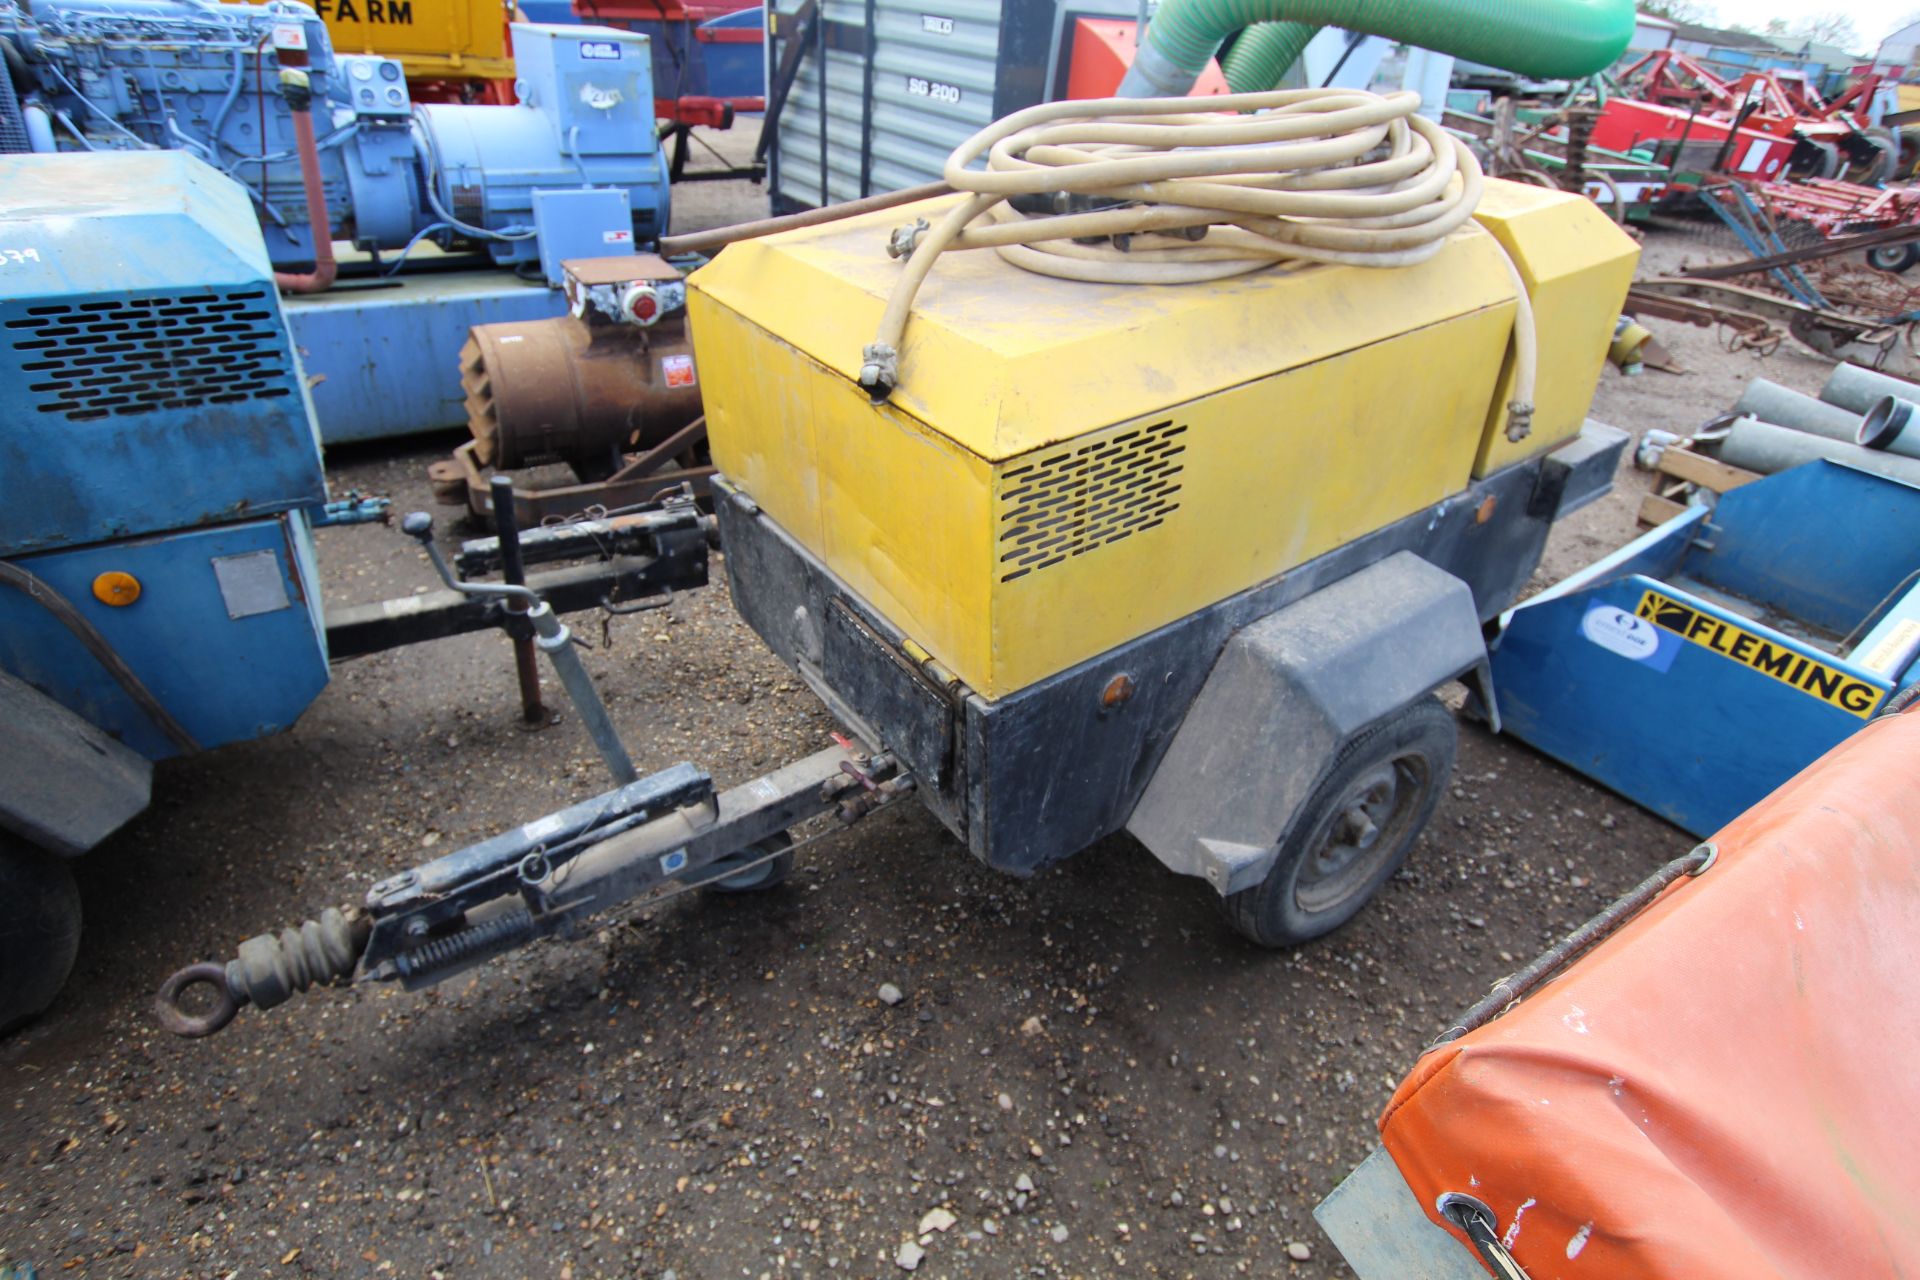 Road tow compressor. With pipes, lance and breaker